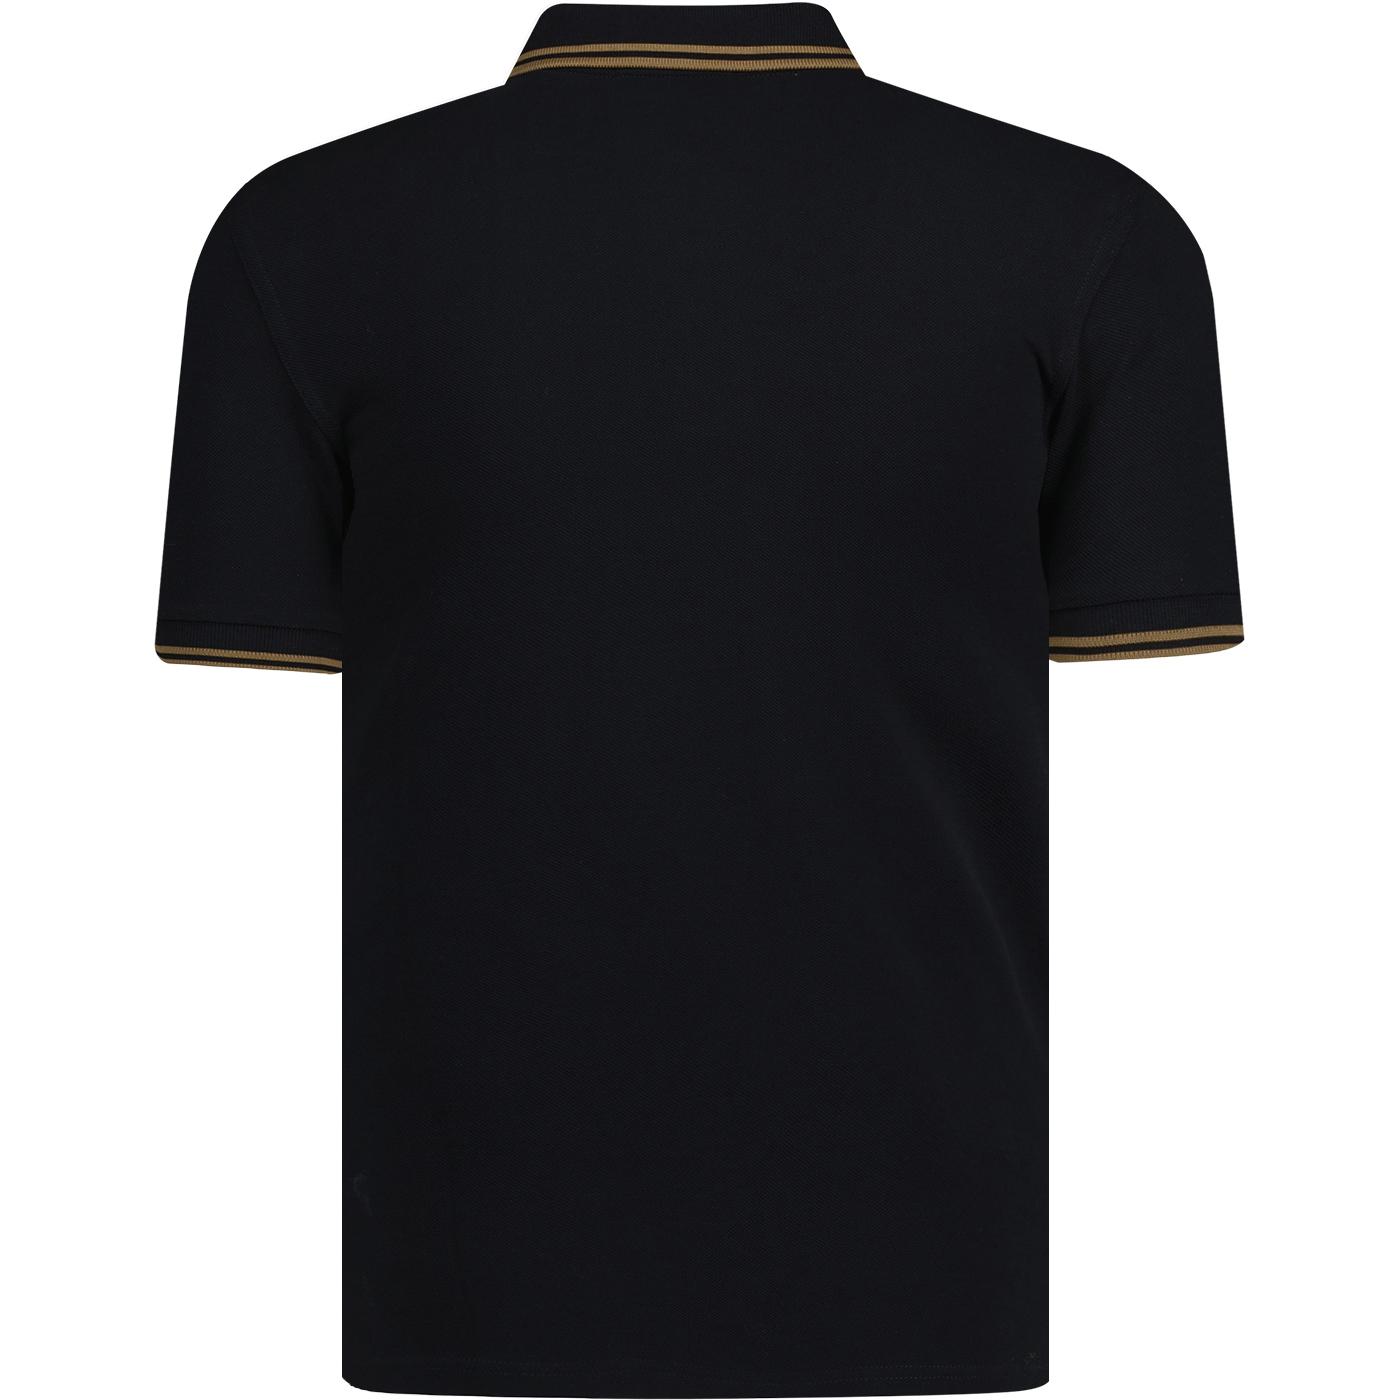 FRED PERRY M3600 Twin Tipped Polo Top in Black & Shaded Stone.